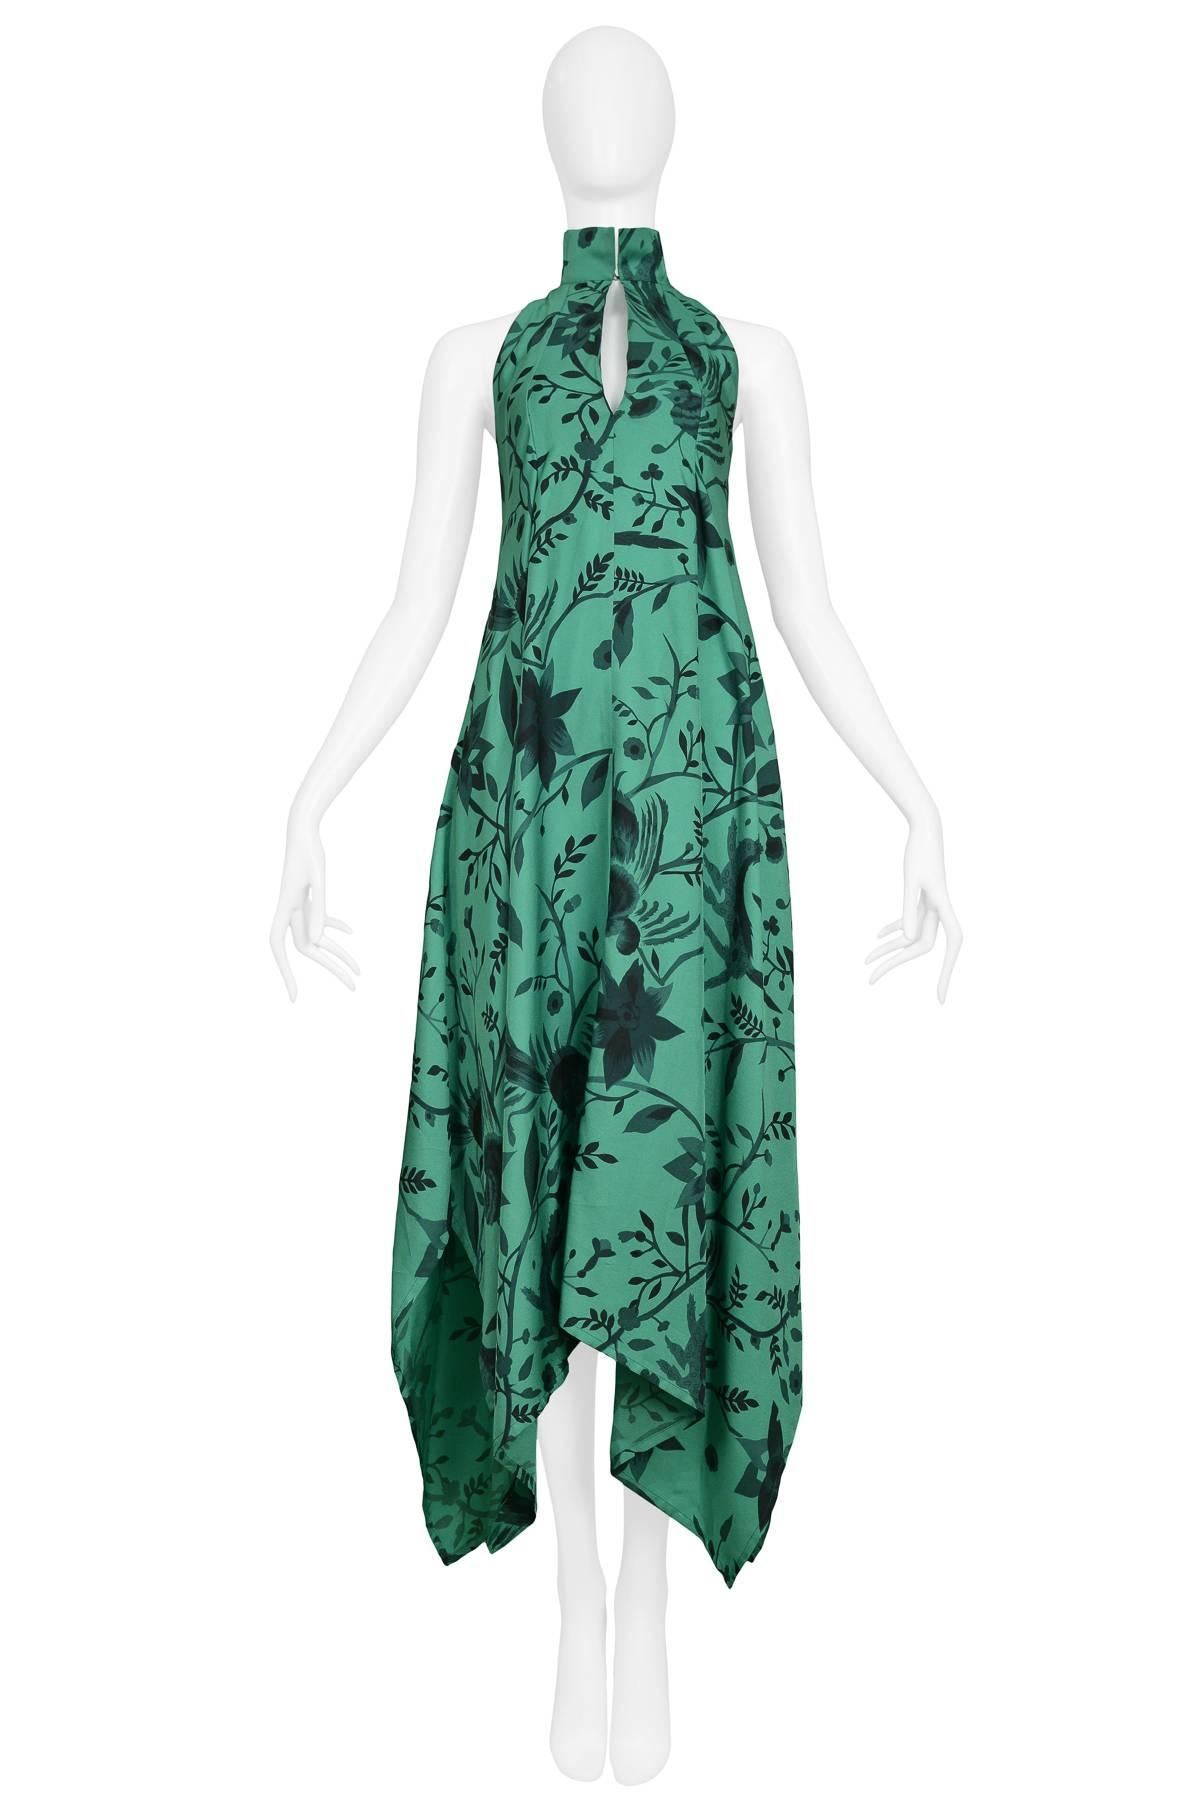 Early vintage green floral Issey Miyake dress with high collar, keyhole front and handkerchief hemline. Circa 1970s.